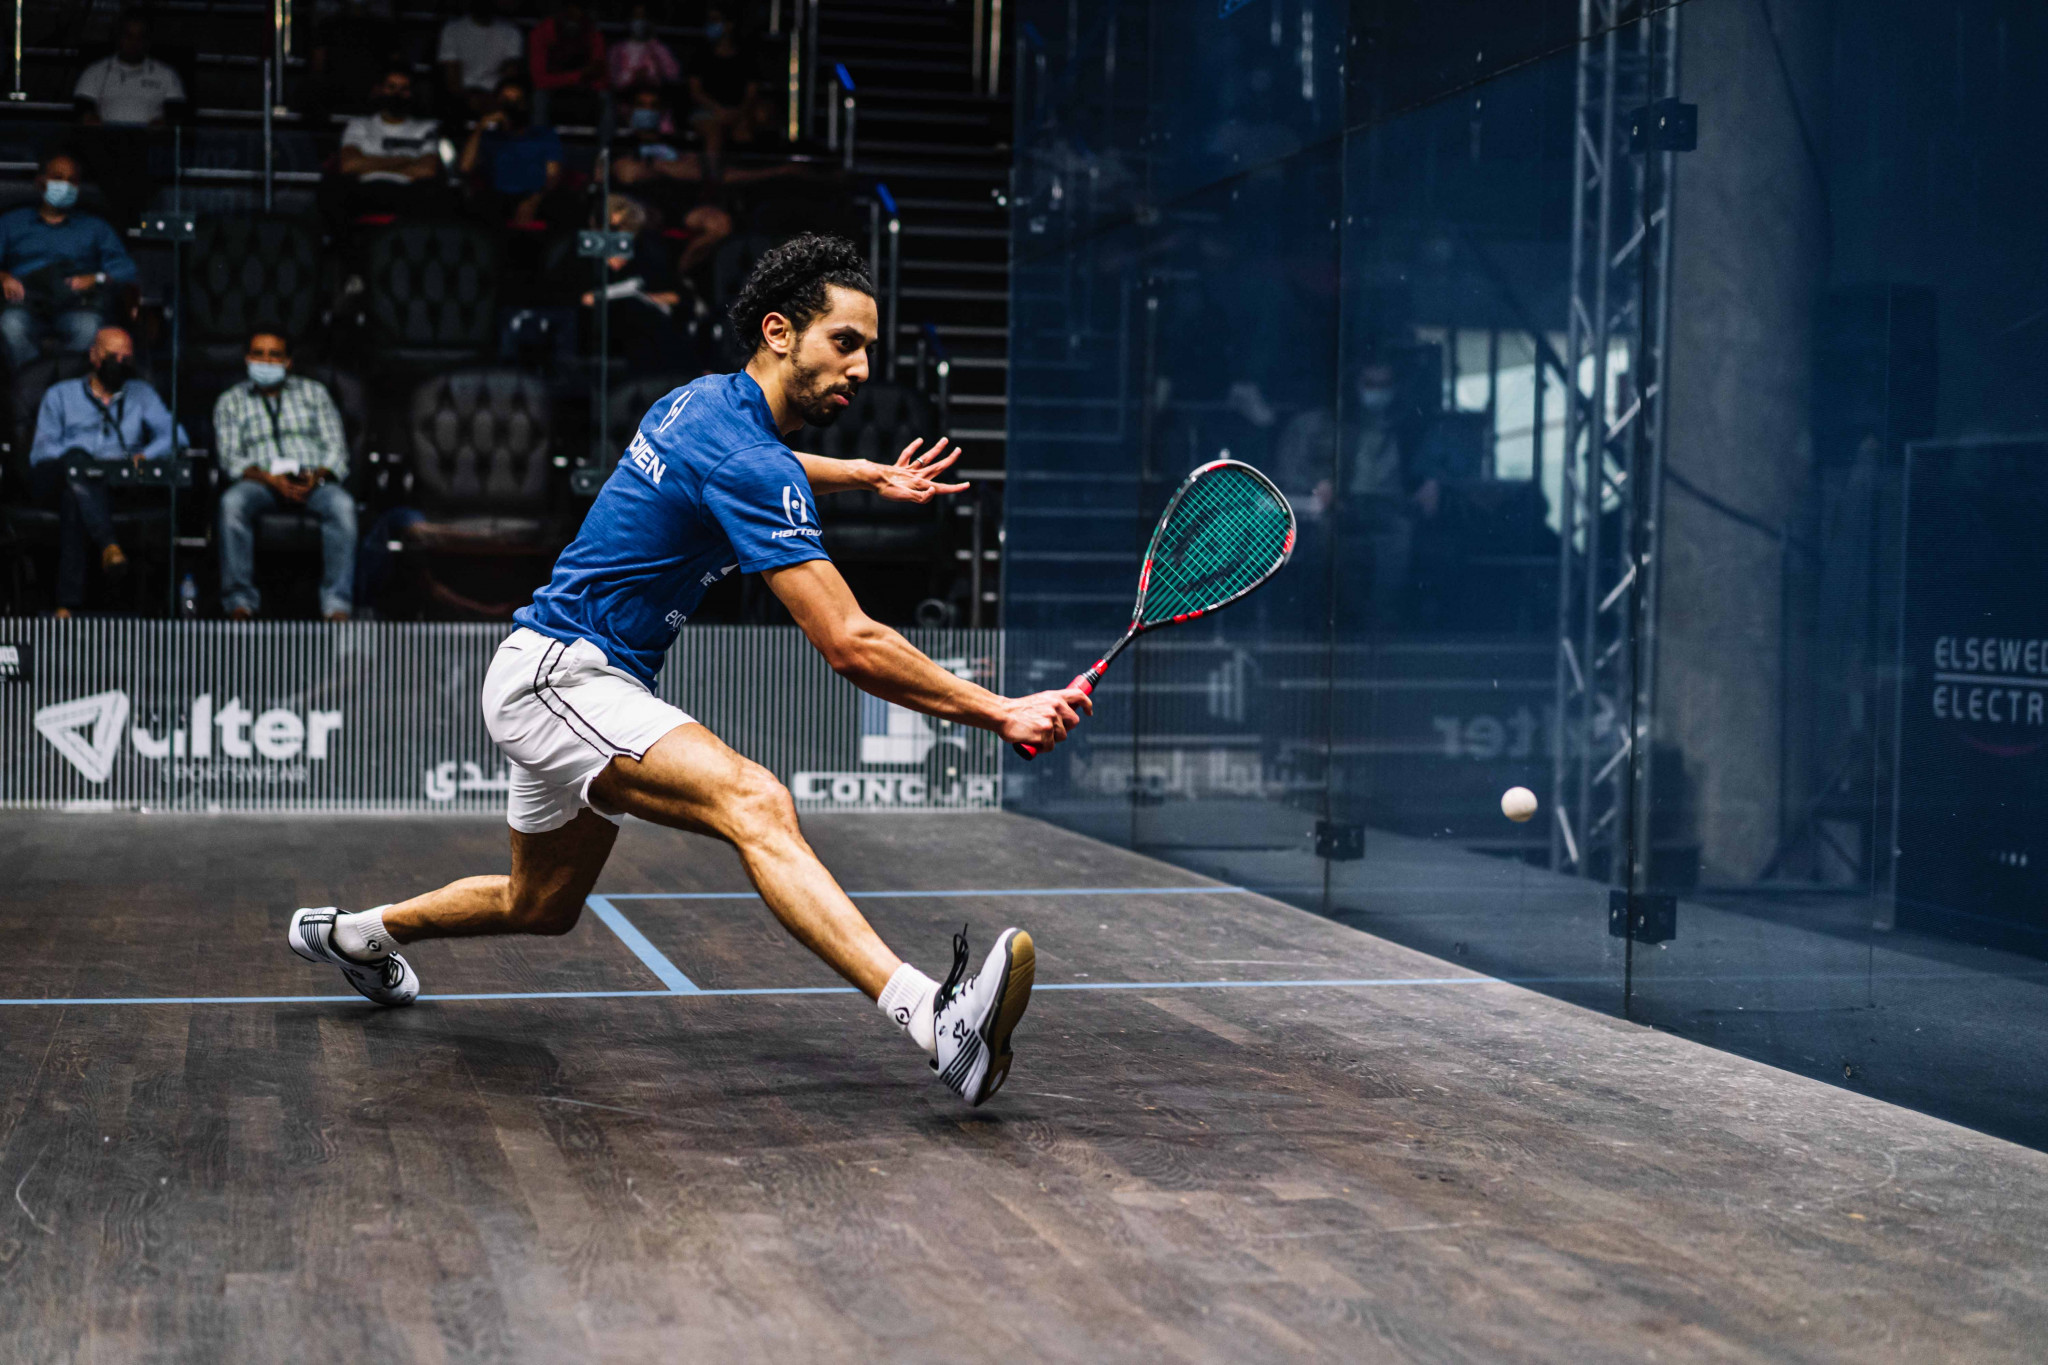 World champion Tarek Momen of Egypt, seeded three, is the highest remaining seed in the draw after a day of upsets in Cairo ©PSA